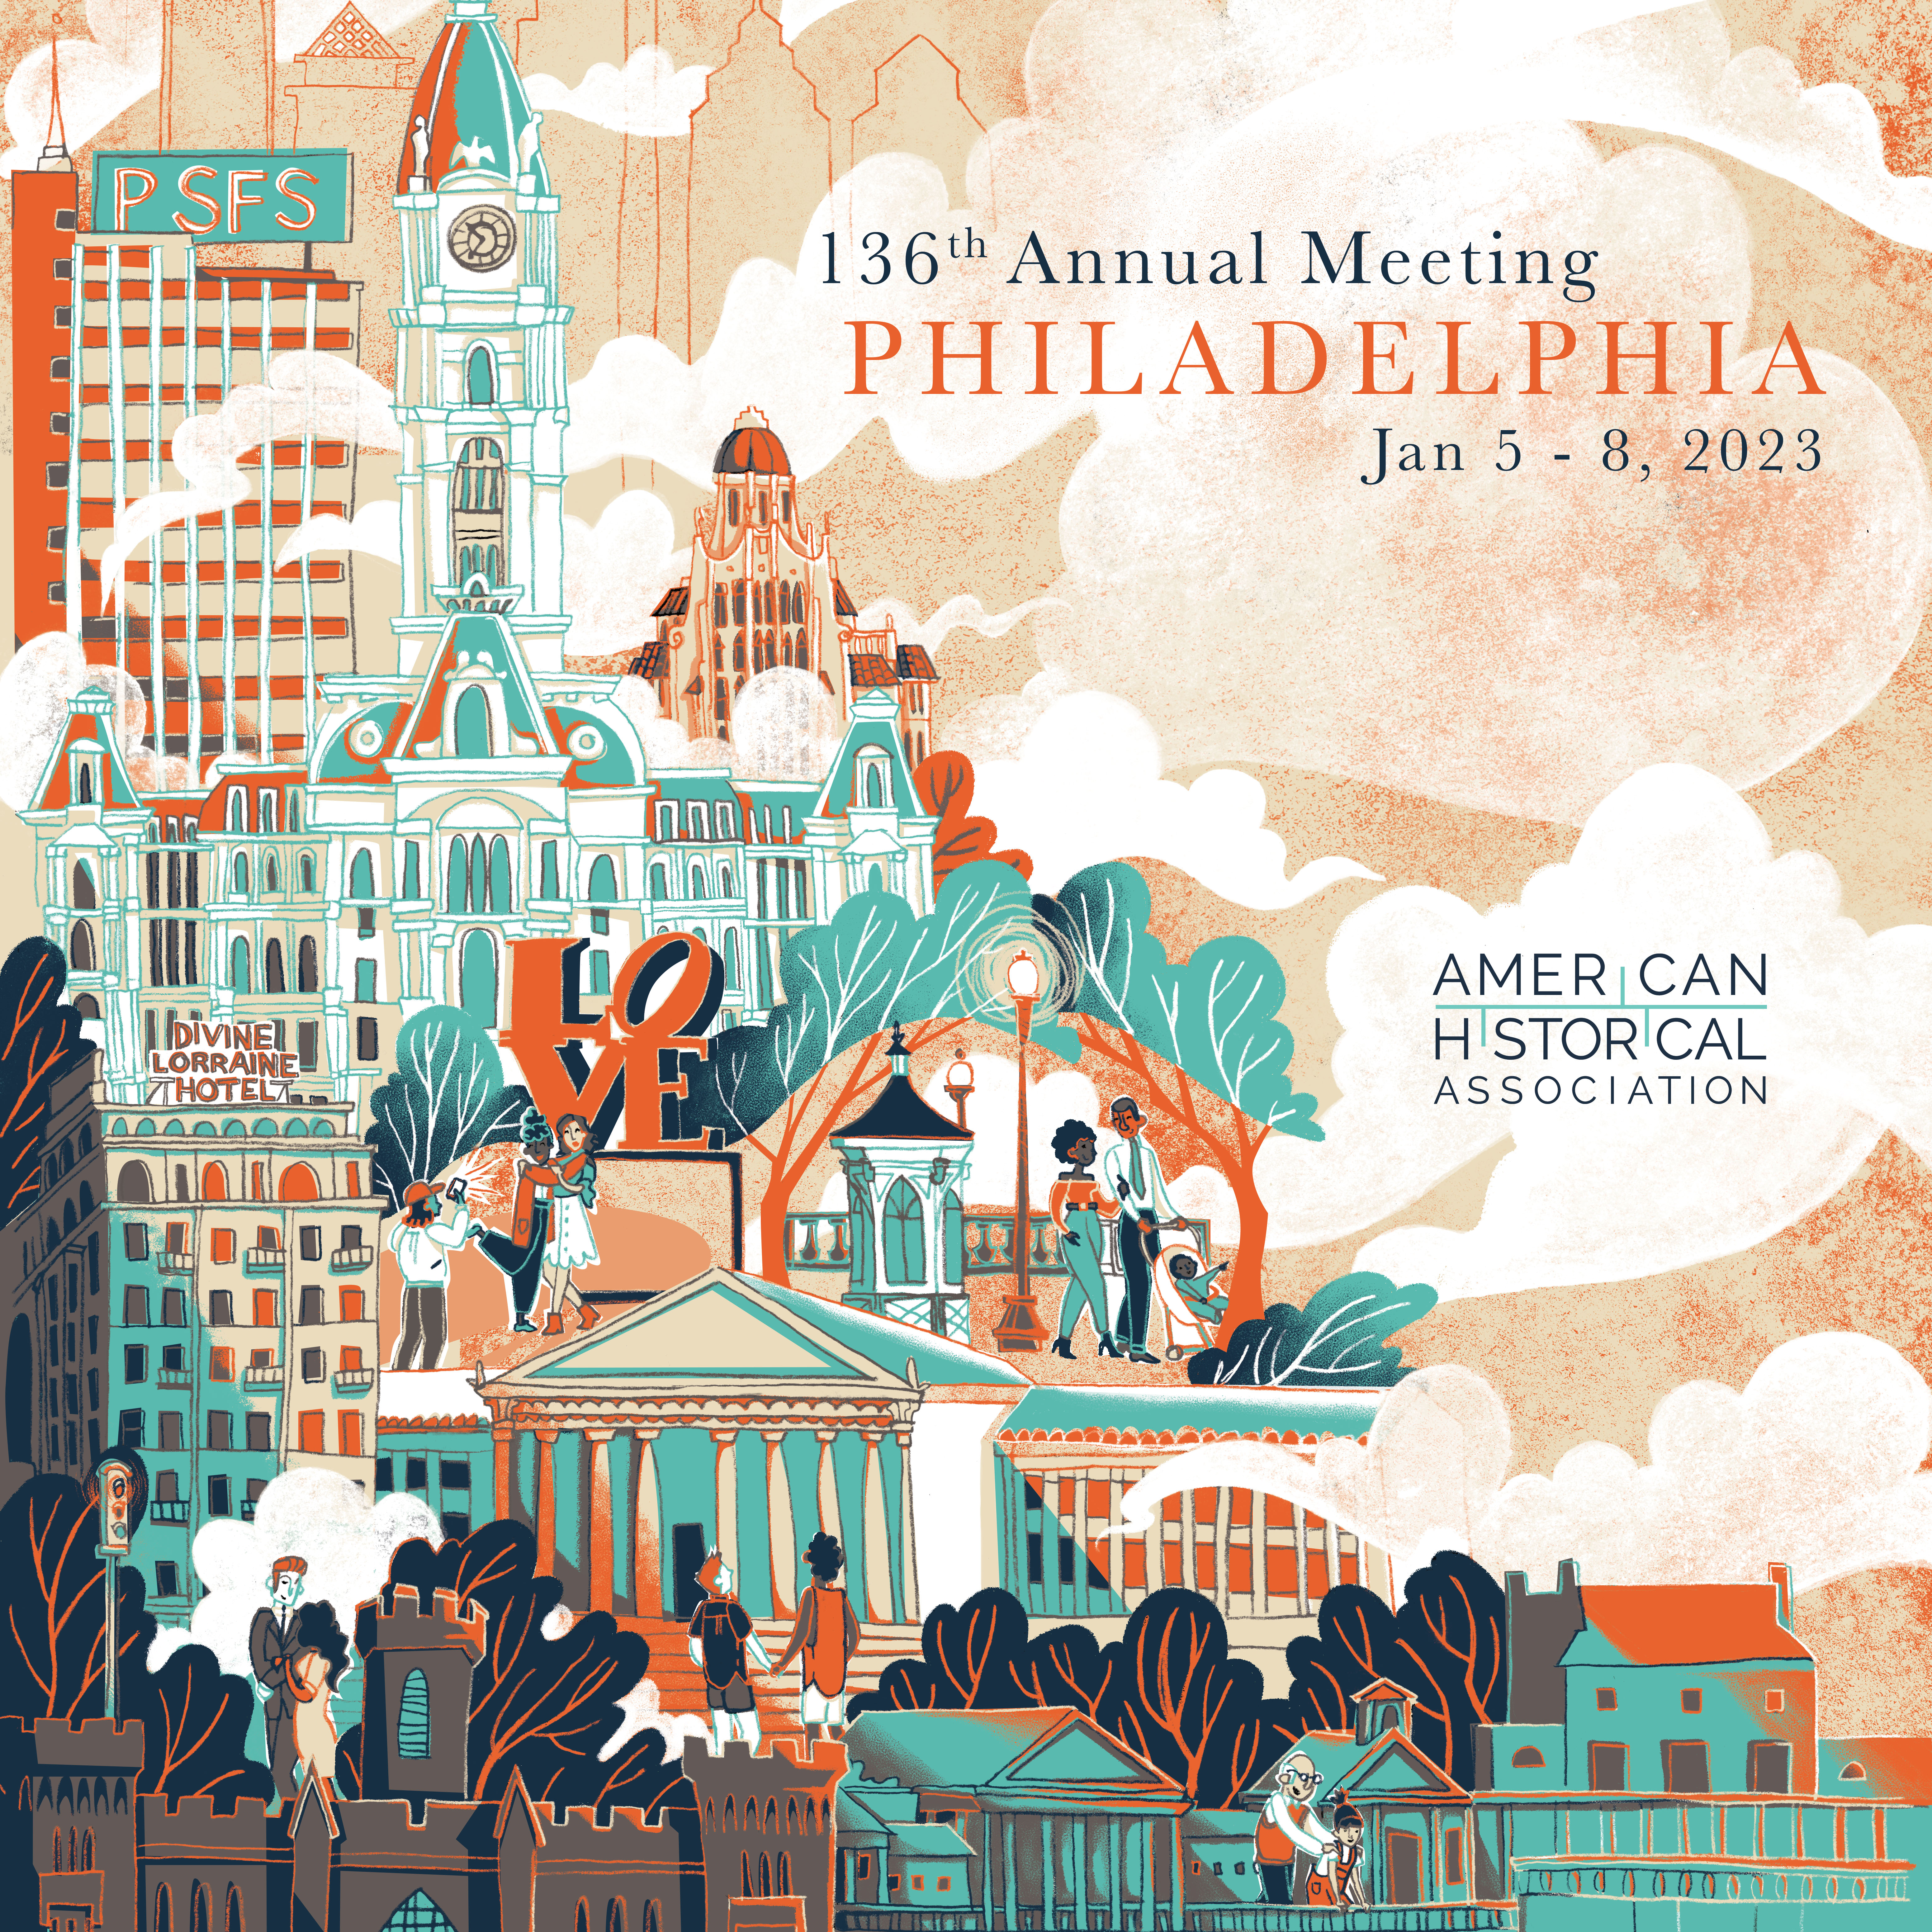 Awards, Prizes, and Honors to Be Conferred at the 136th Annual Meeting